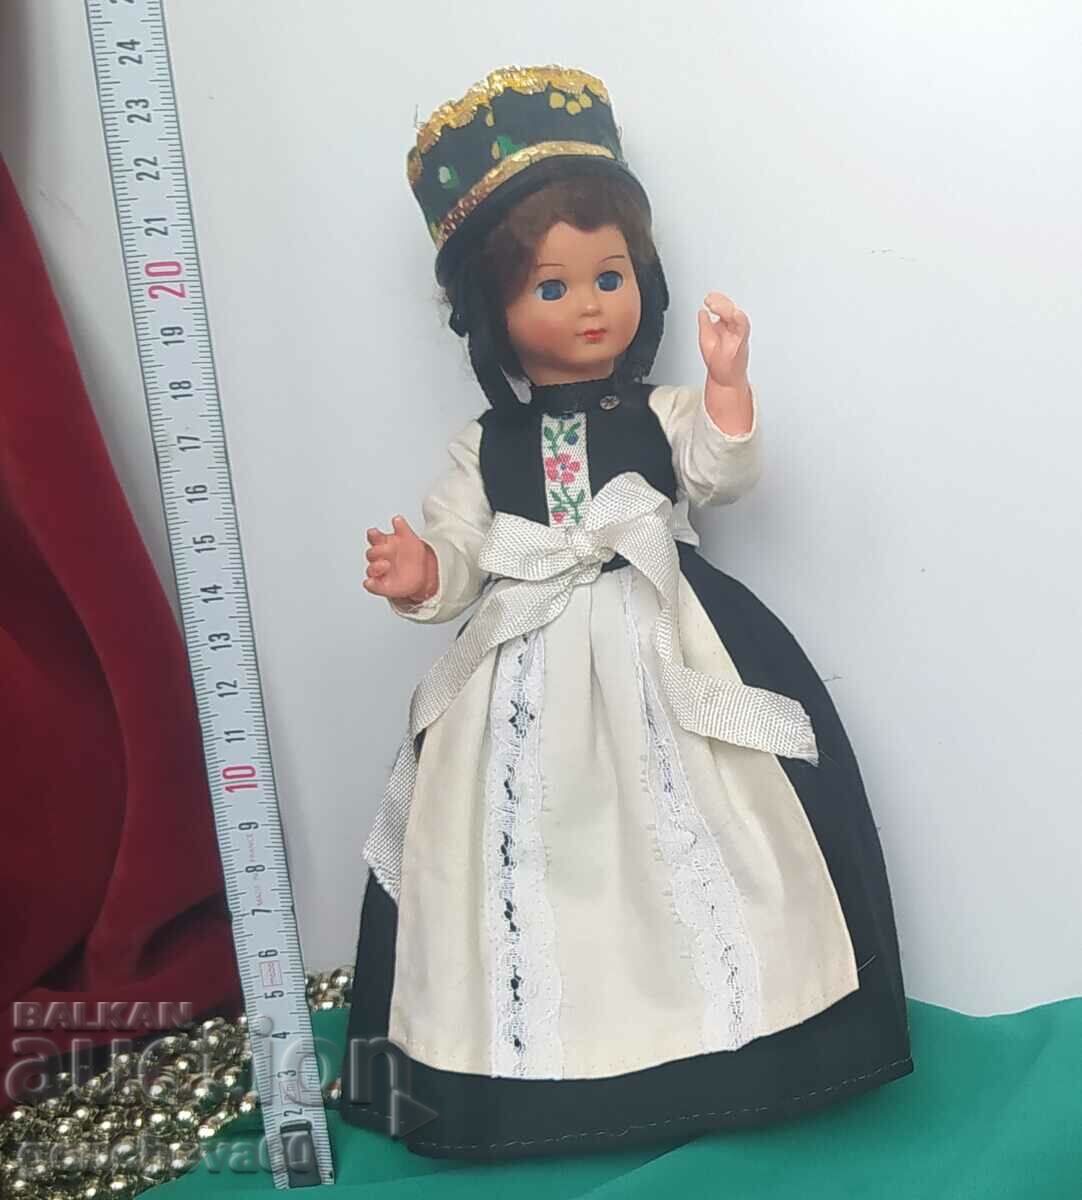 Vintage folkloric doll with blinking eyes